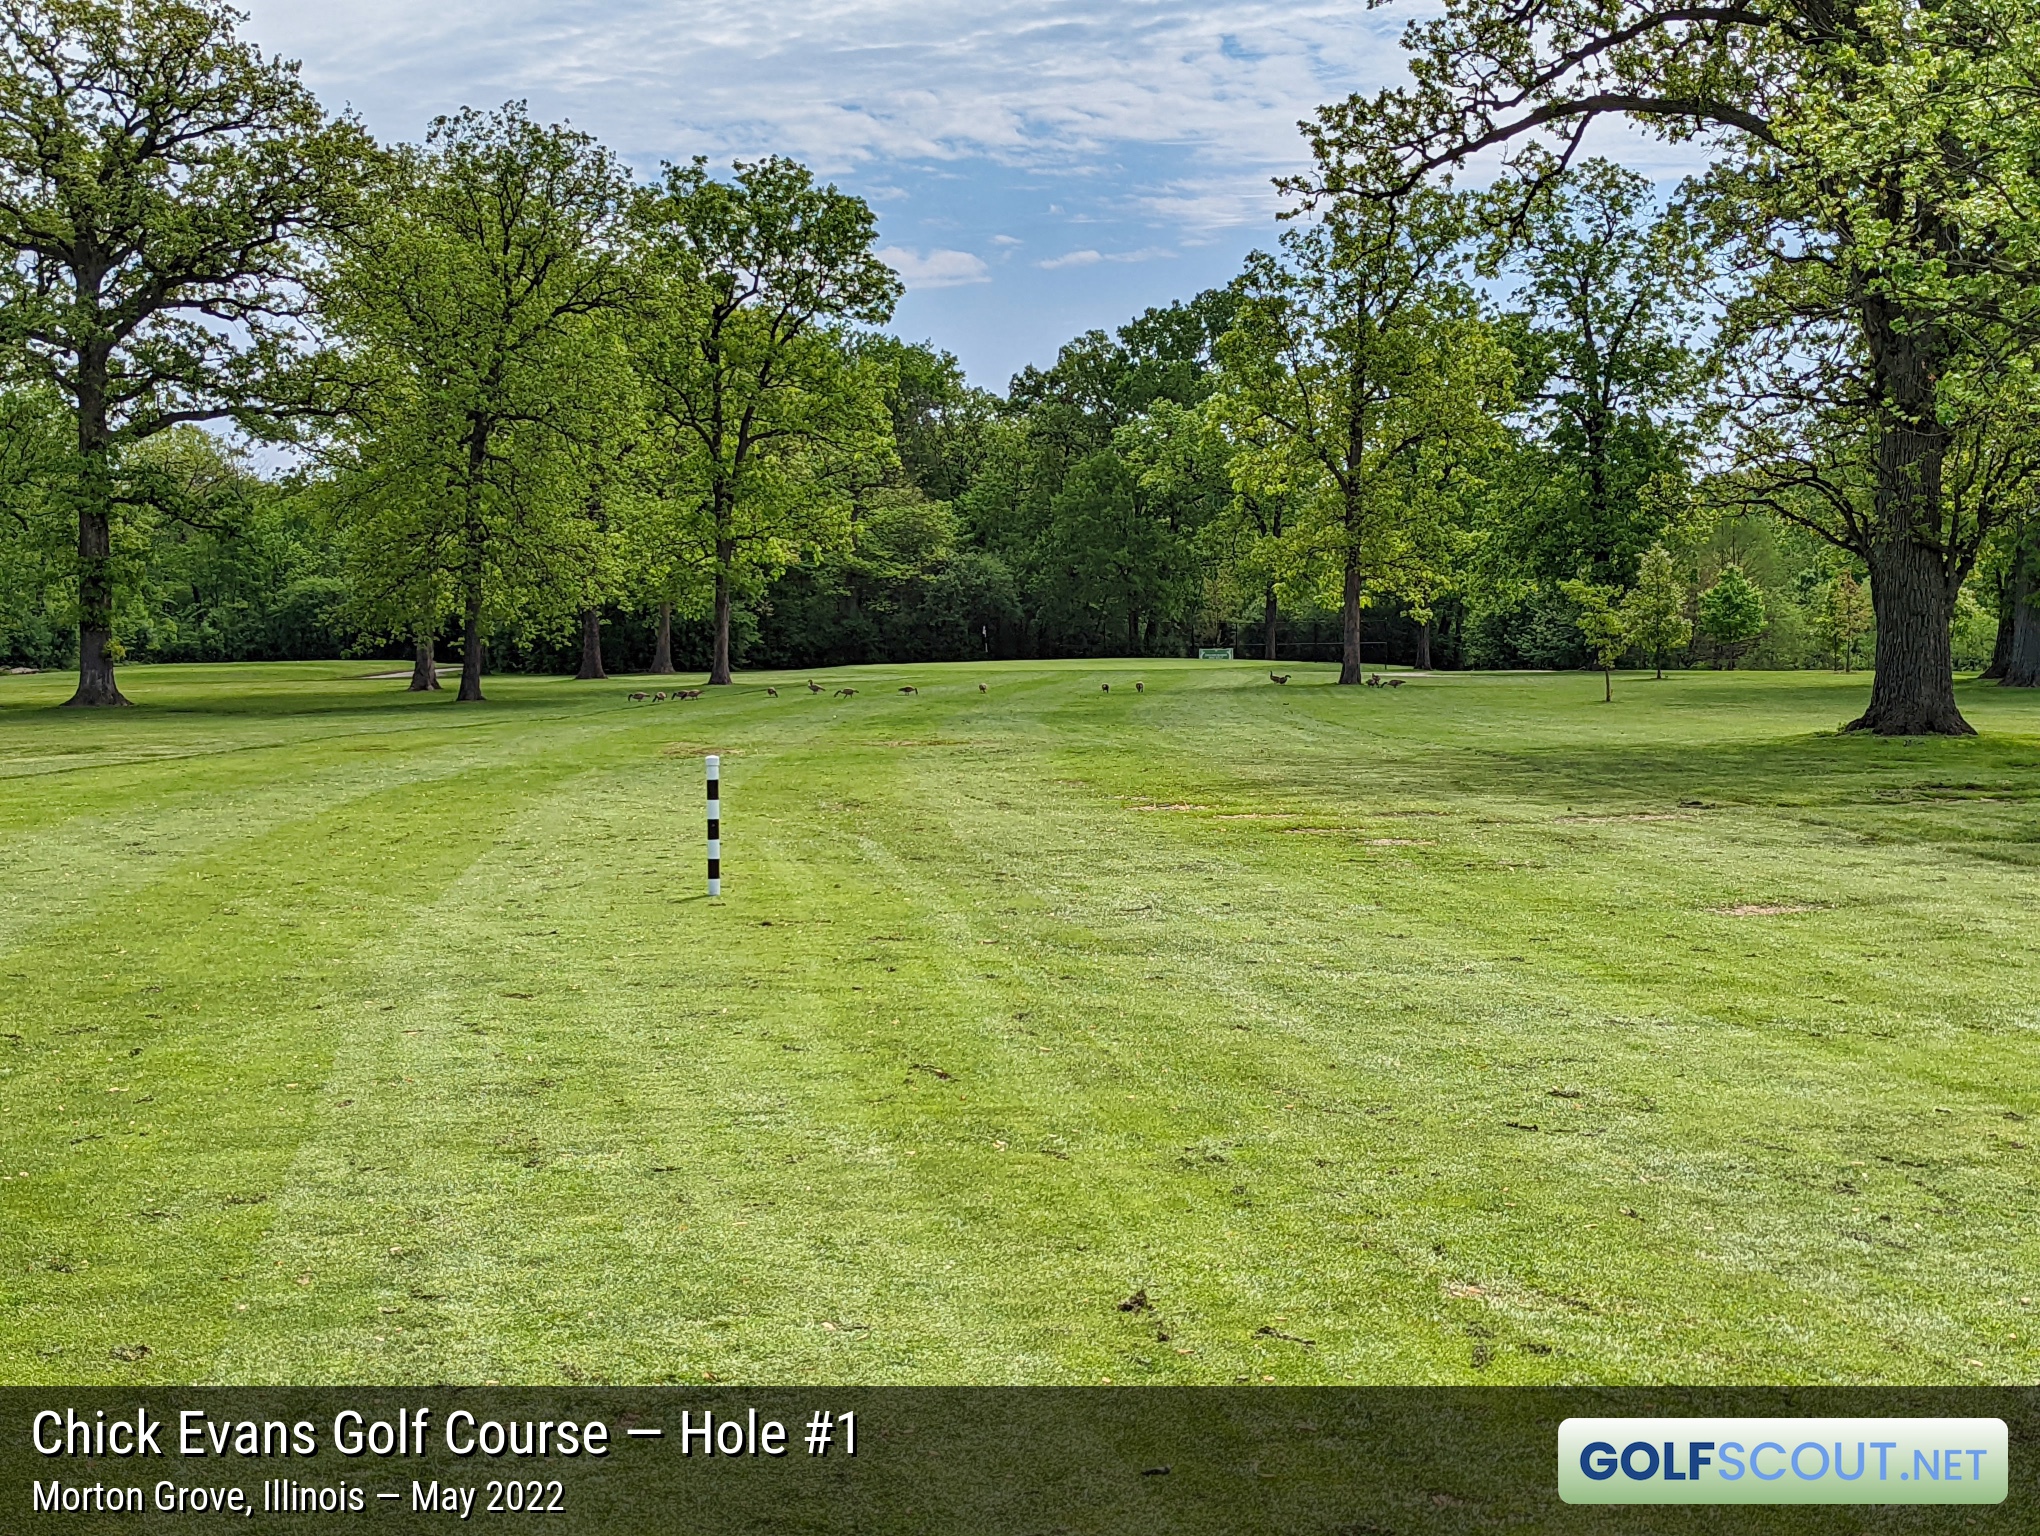 Photo of hole #1 at Chick Evans Golf Course in Morton Grove, Illinois. 